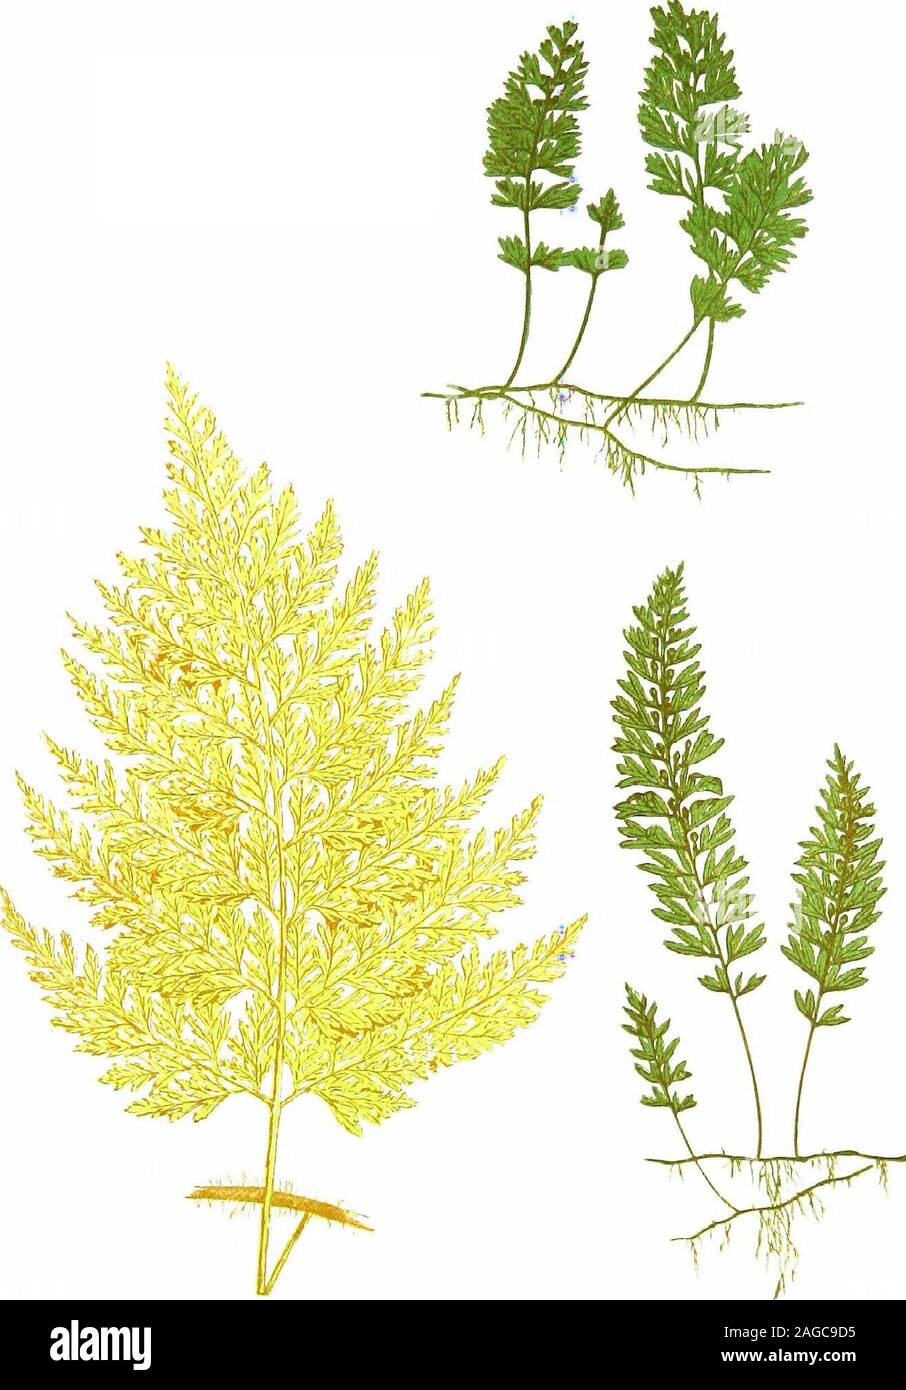 . British ferns and their varieties. Kig- 313- S. v. ltndulalo-ramosum. Fjg. 314. *S ?. widulaliuu. Undui.ato-ramosum (Fig. 313).—Found by Mr. Moly ; robusterthan sinuato-multifidum, but on similar lines. U.-rigidum.—It was from the spores of this variety thatMessrs. Stansfield raised their beautiful fimbriate crispums (seePlate XXXVIII) ; found by Mr. Edwards in Devon. U.-supra-lineatum.—A very fine form raised by Col. Jones. Undulatum (Fig. 314).—Found in several places; fronds un-dulate or semi-frilled a la crisfum, but freely fertile.. PLATE XXXIX. Trichomancs rati leans Hymenophyllum Tun Stock Photo